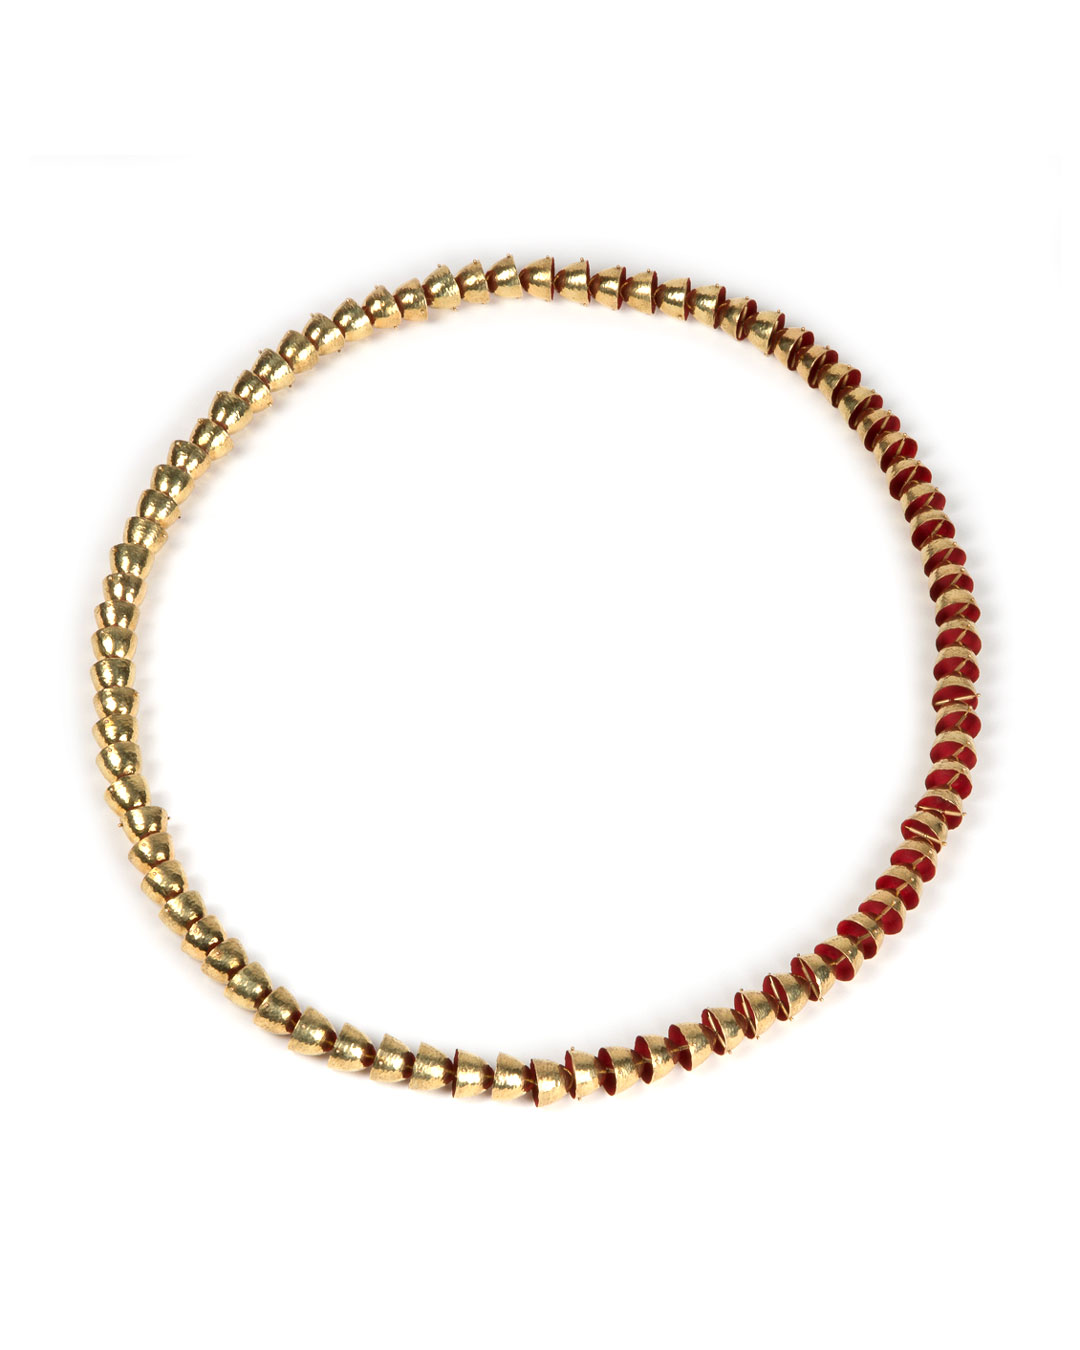 Piergiuliano Reveane, untitled, 2018, necklace; gold, enamel, ø 895 x 14 mm, price on request (image 3/3)